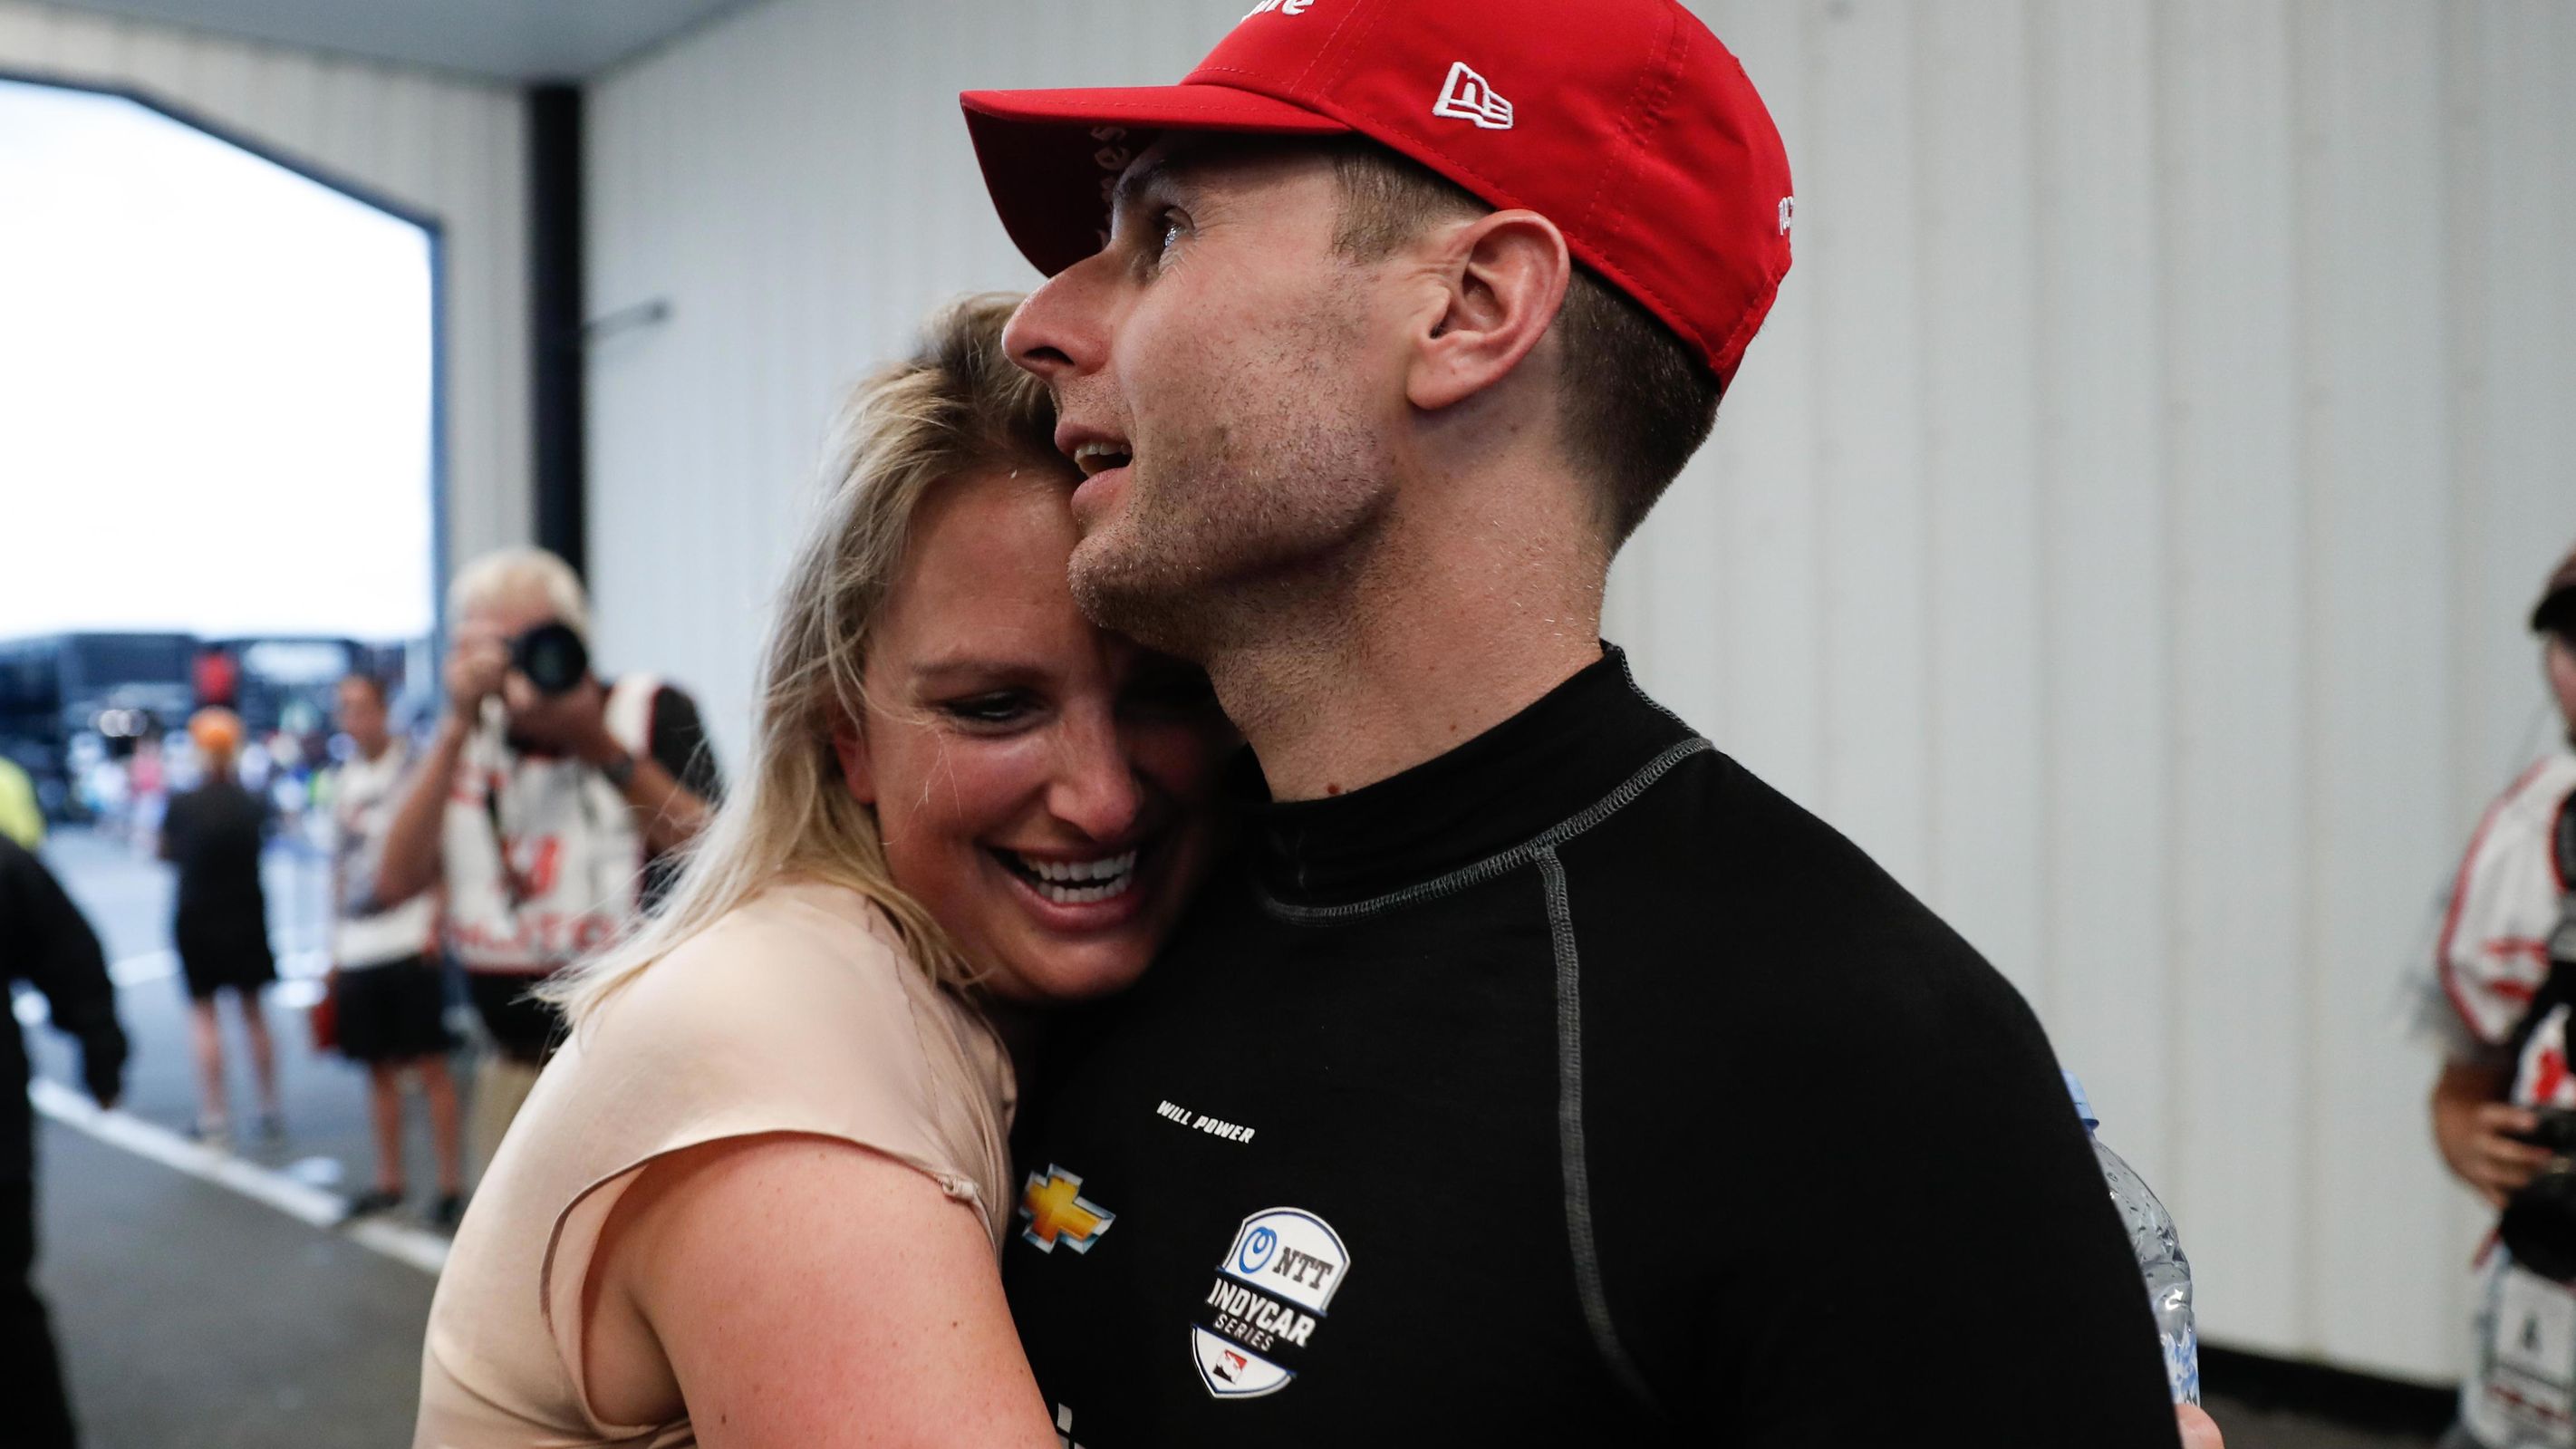 Liz Power (left) celebrates with husband Will after winning the 2019 IndyCar race at Pocono.